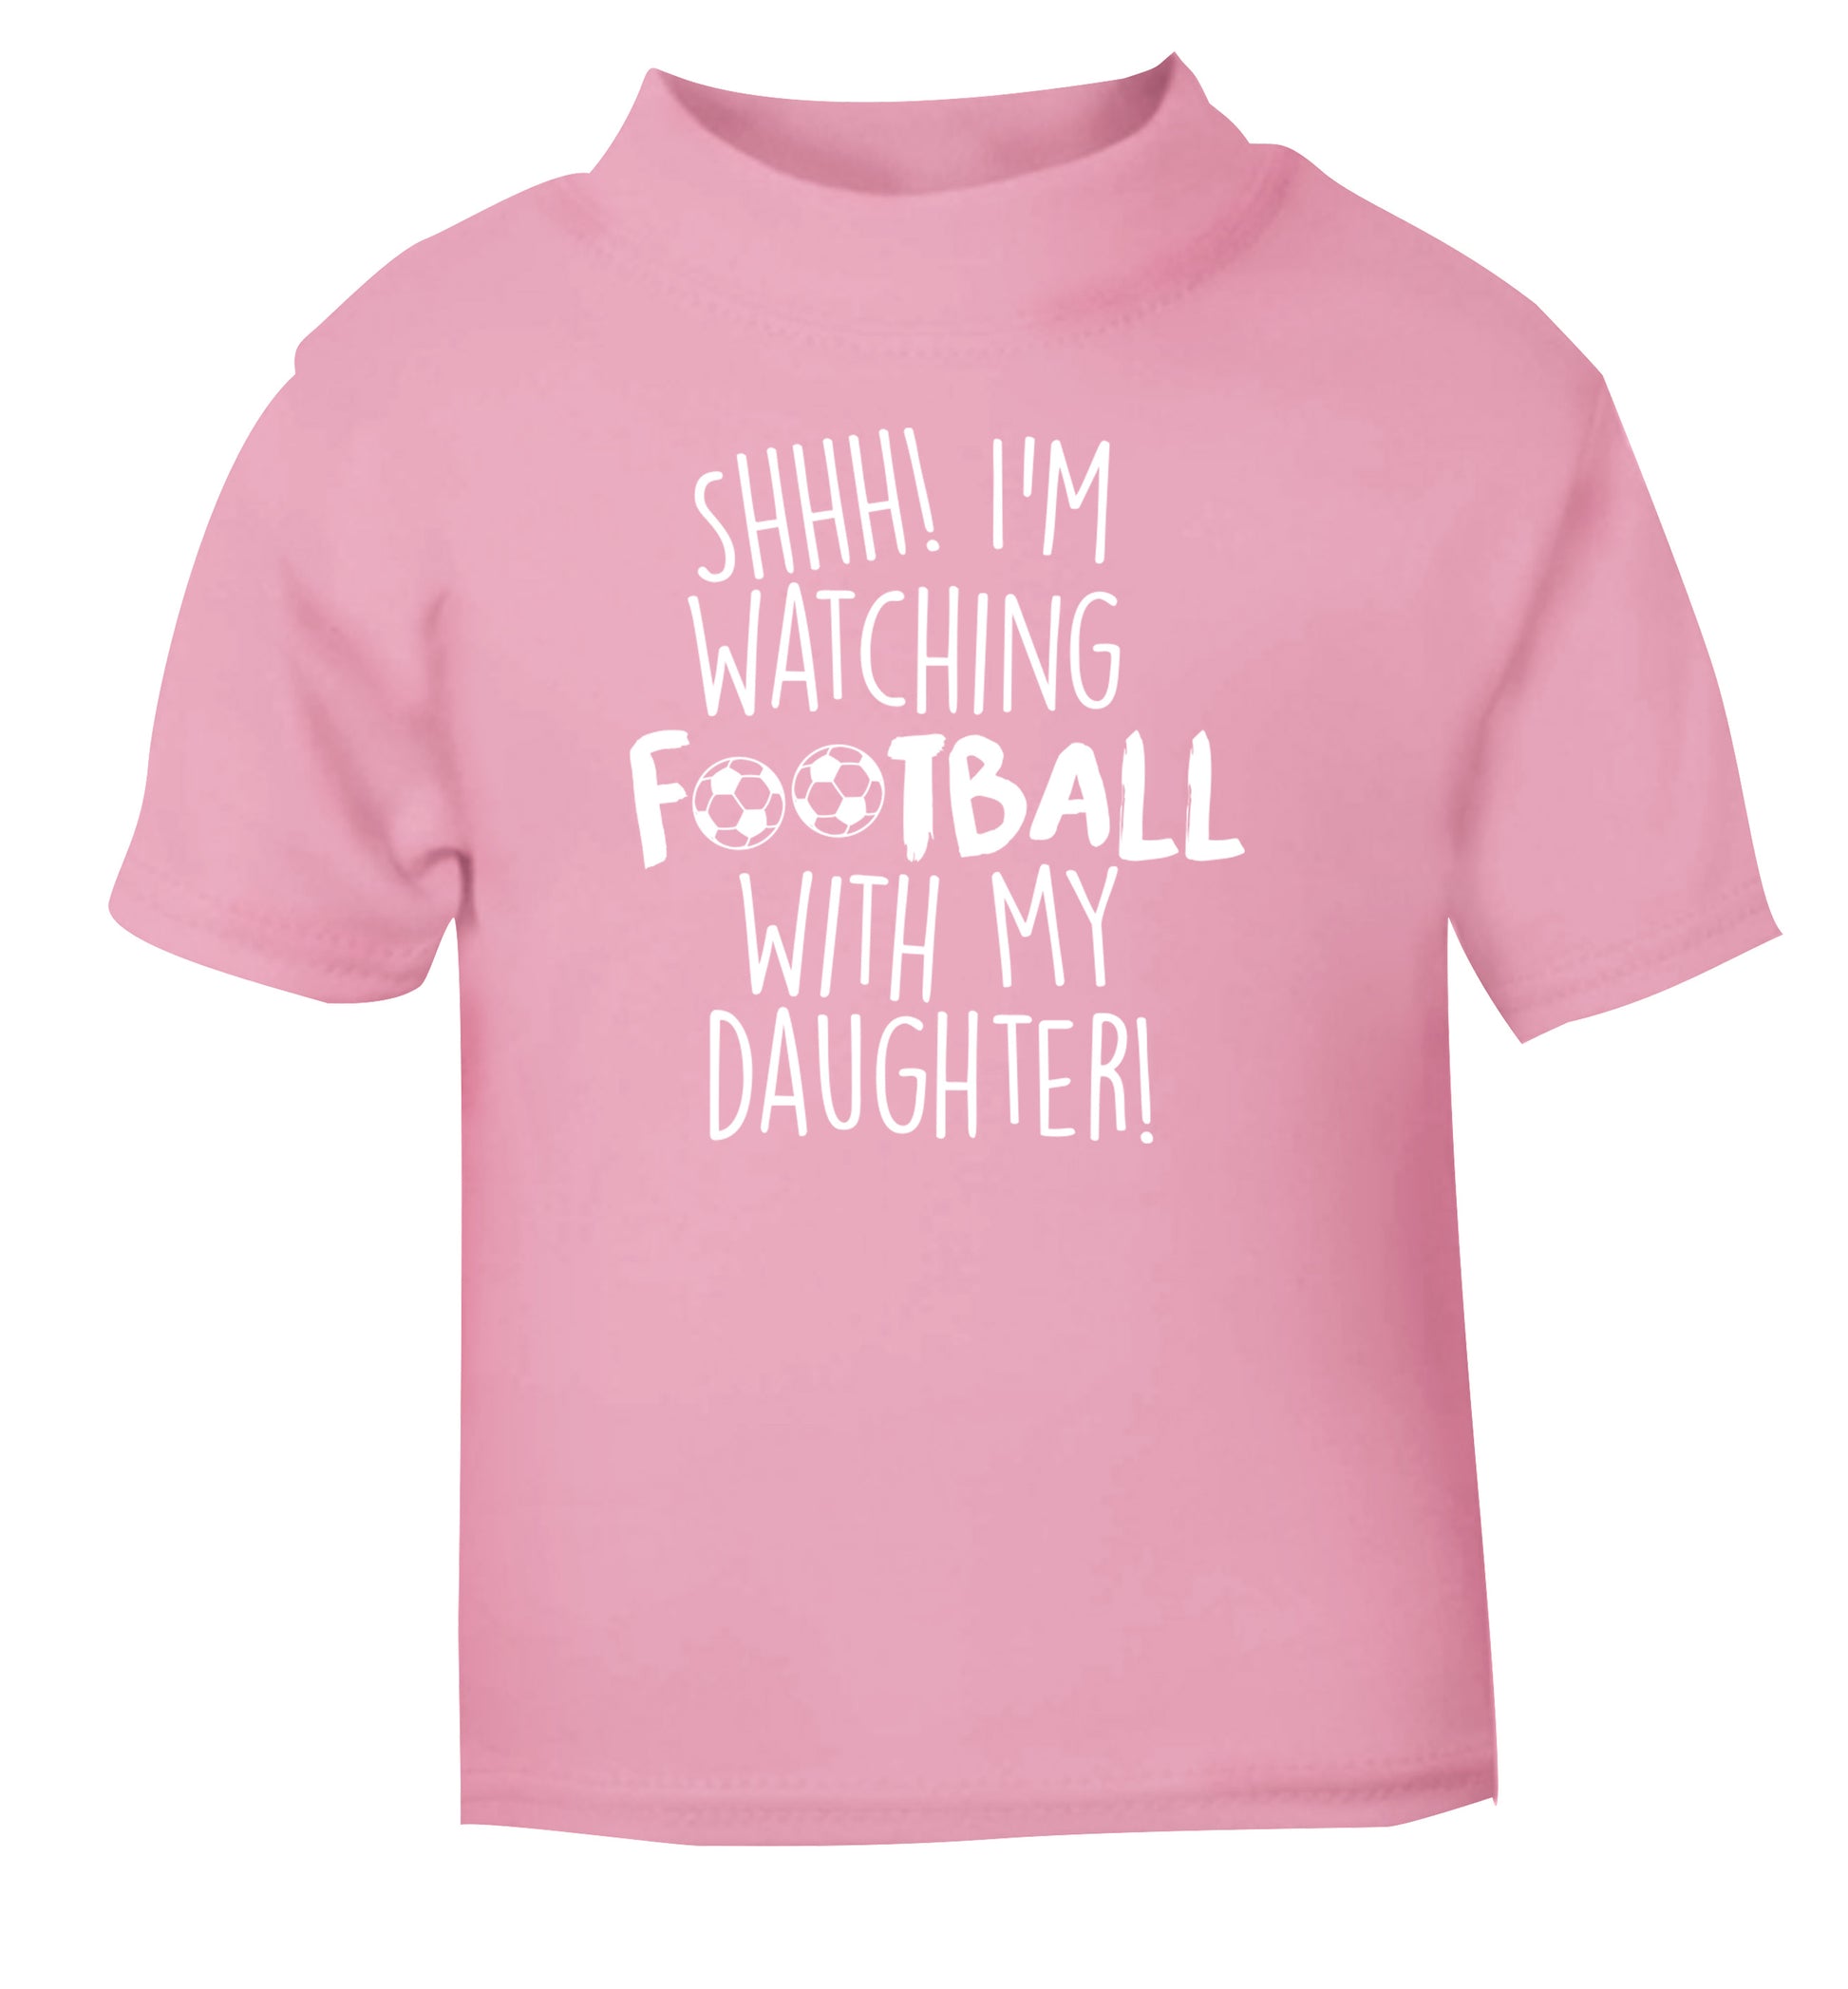 Shhh I'm watching football with my daughter light pink Baby Toddler Tshirt 2 Years